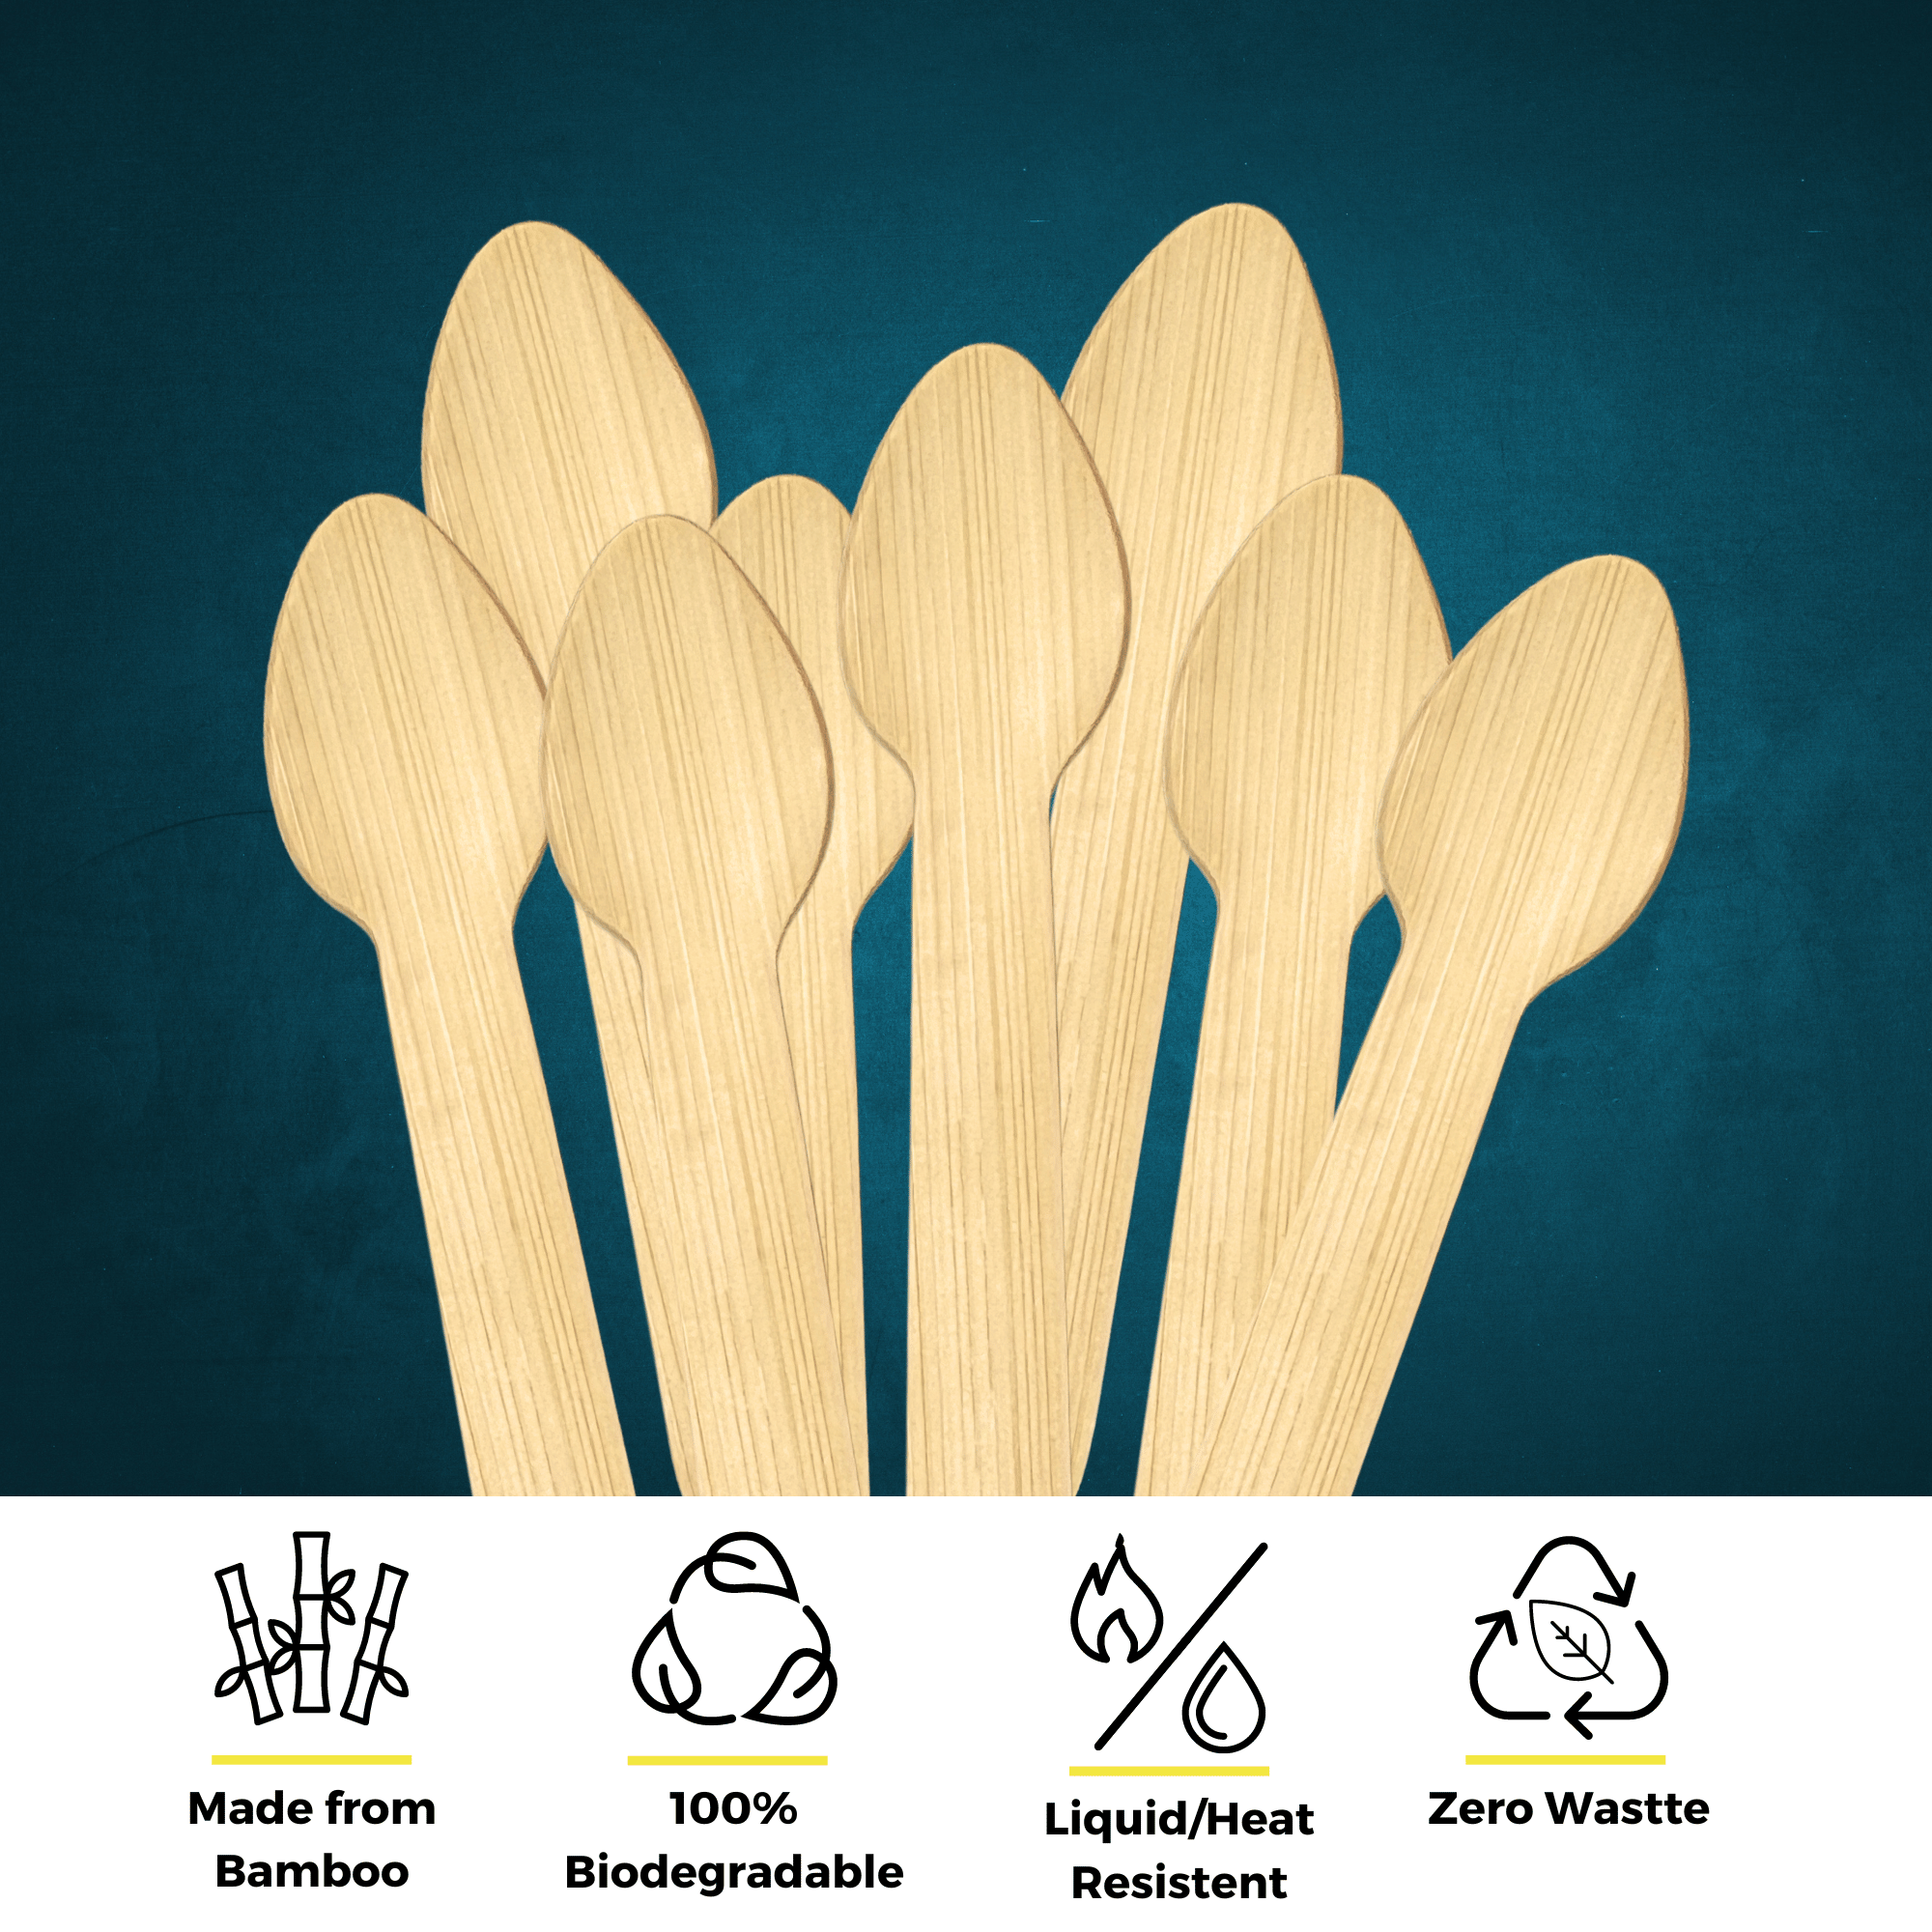 A bundle of bamboo spoons by Holy City Straw Co. grouped together on a dark background, showcasing the product's smooth, natural texture. Accompanying eco-friendly feature icons below highlight that the spoons are Made from Bamboo, 100% Biodegradable, Naturally Anti-bacterial, and contribute to Zero Waste